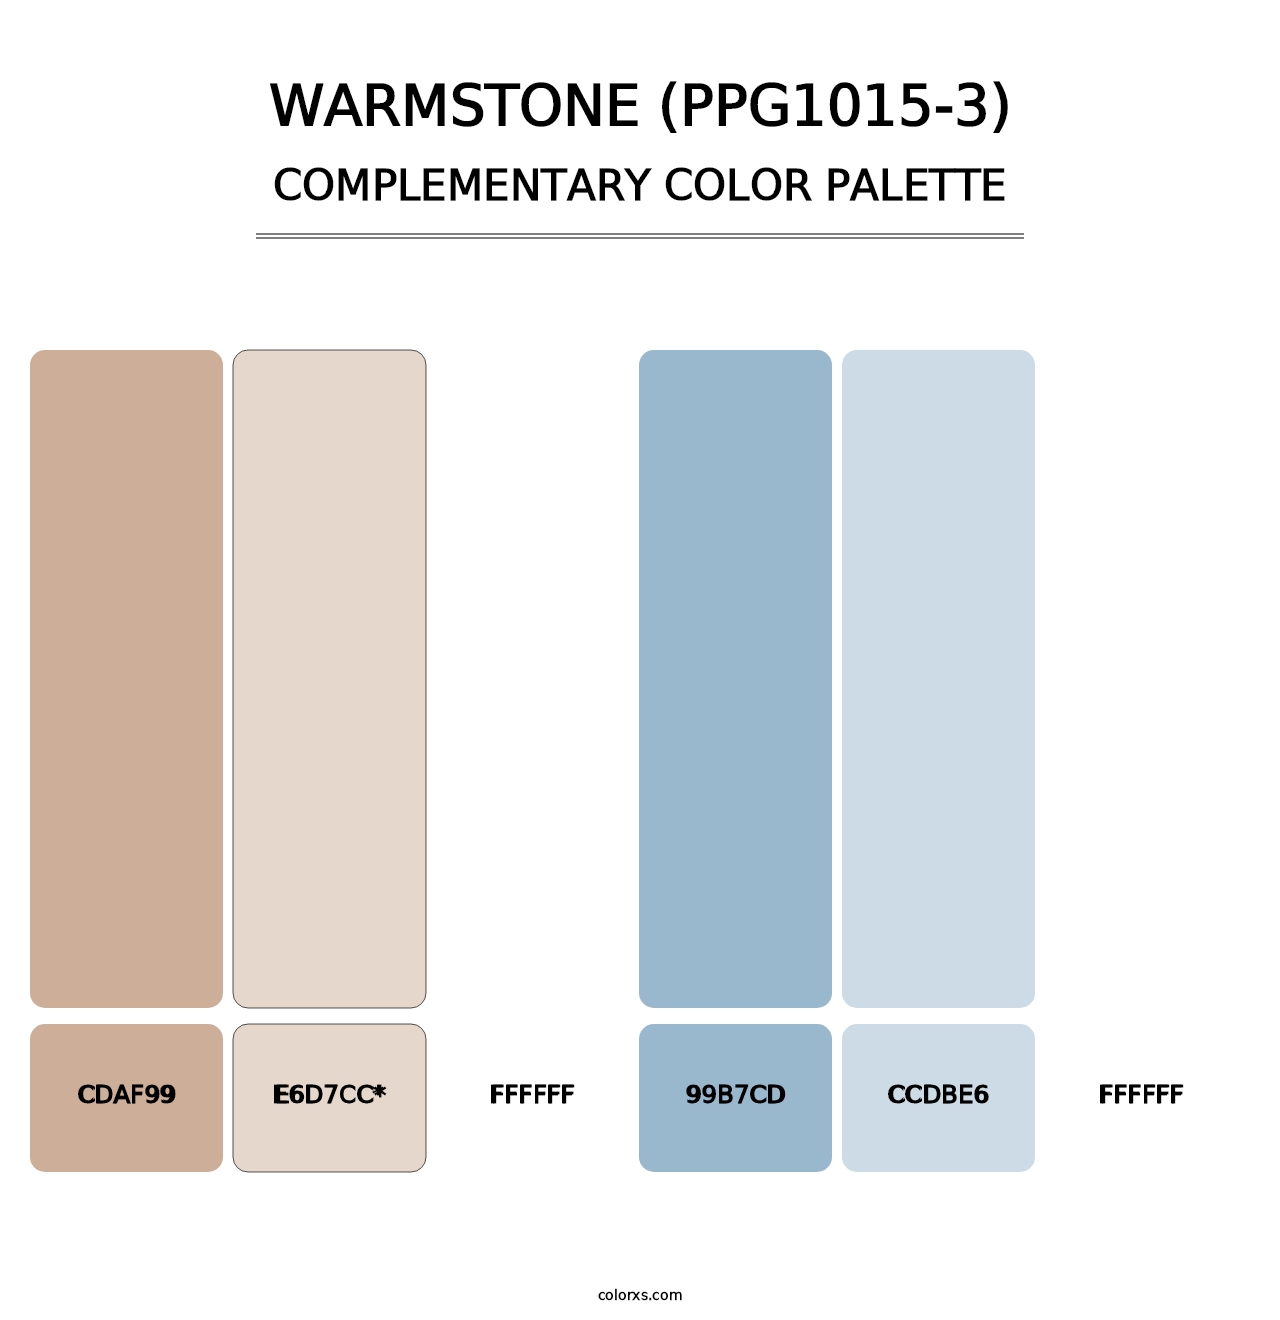 Warmstone (PPG1015-3) - Complementary Color Palette